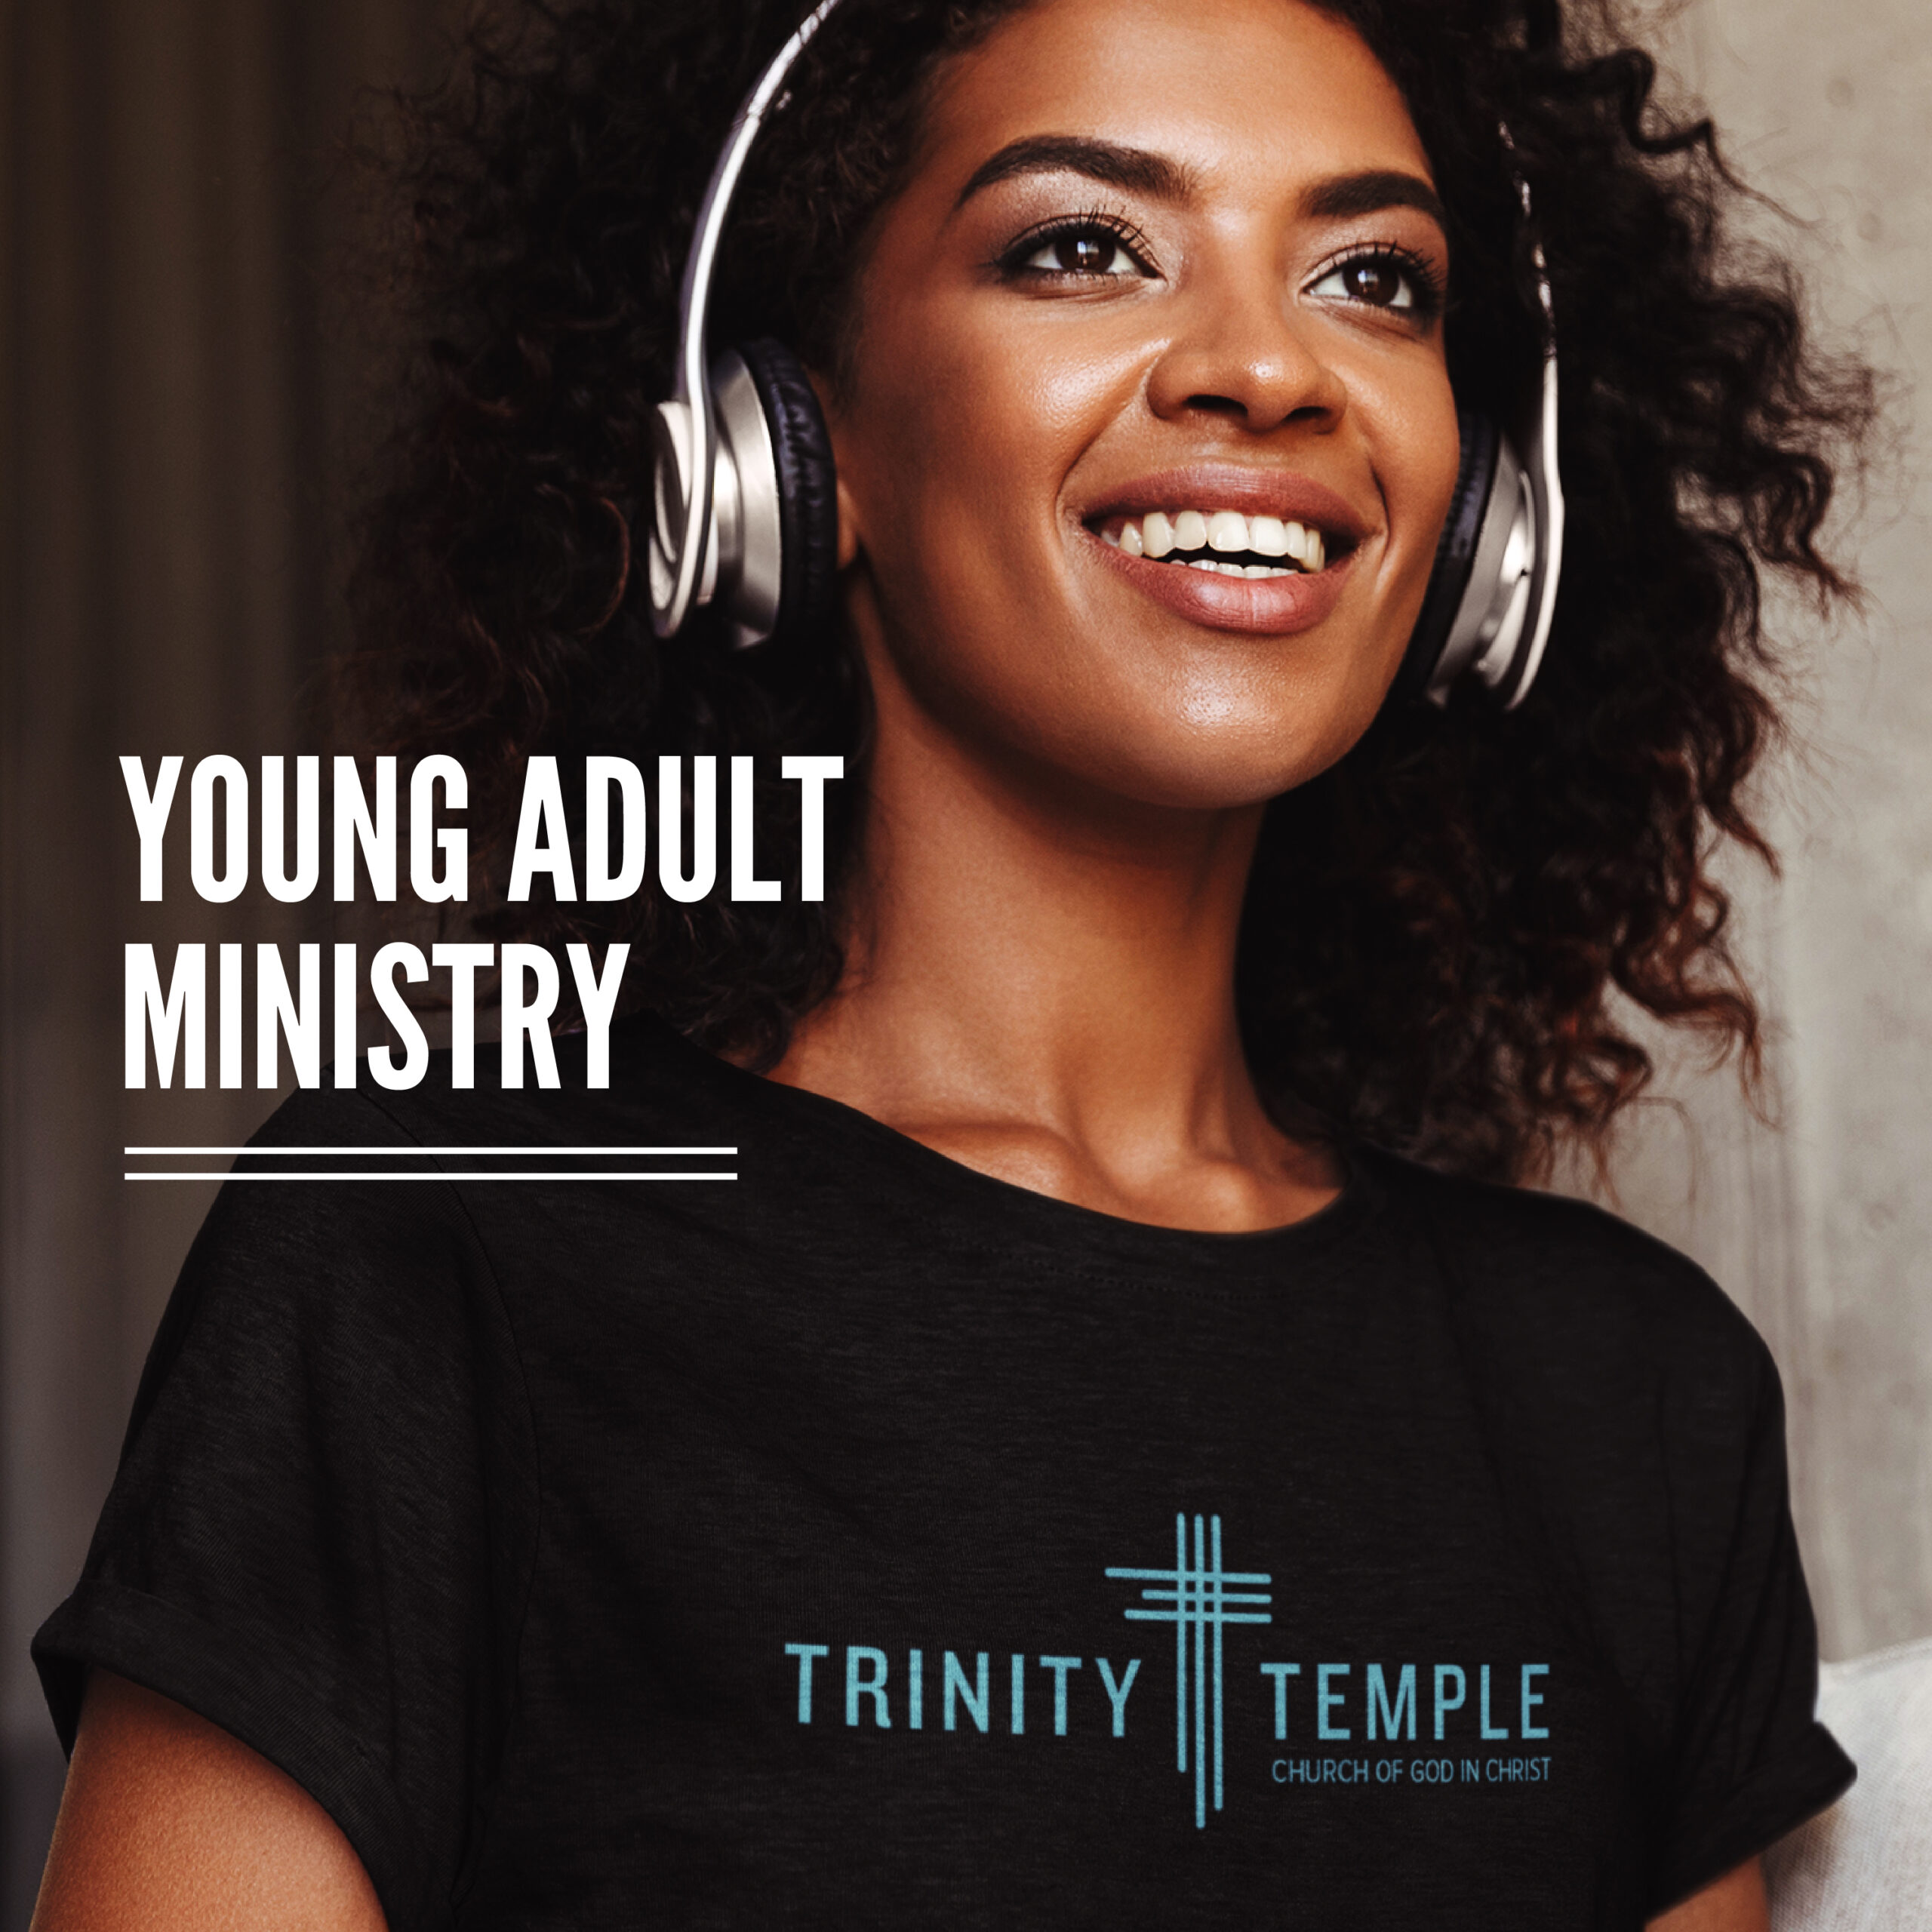 Trinity Temple Church of God in Christ Grandview Kansas City Young Adult